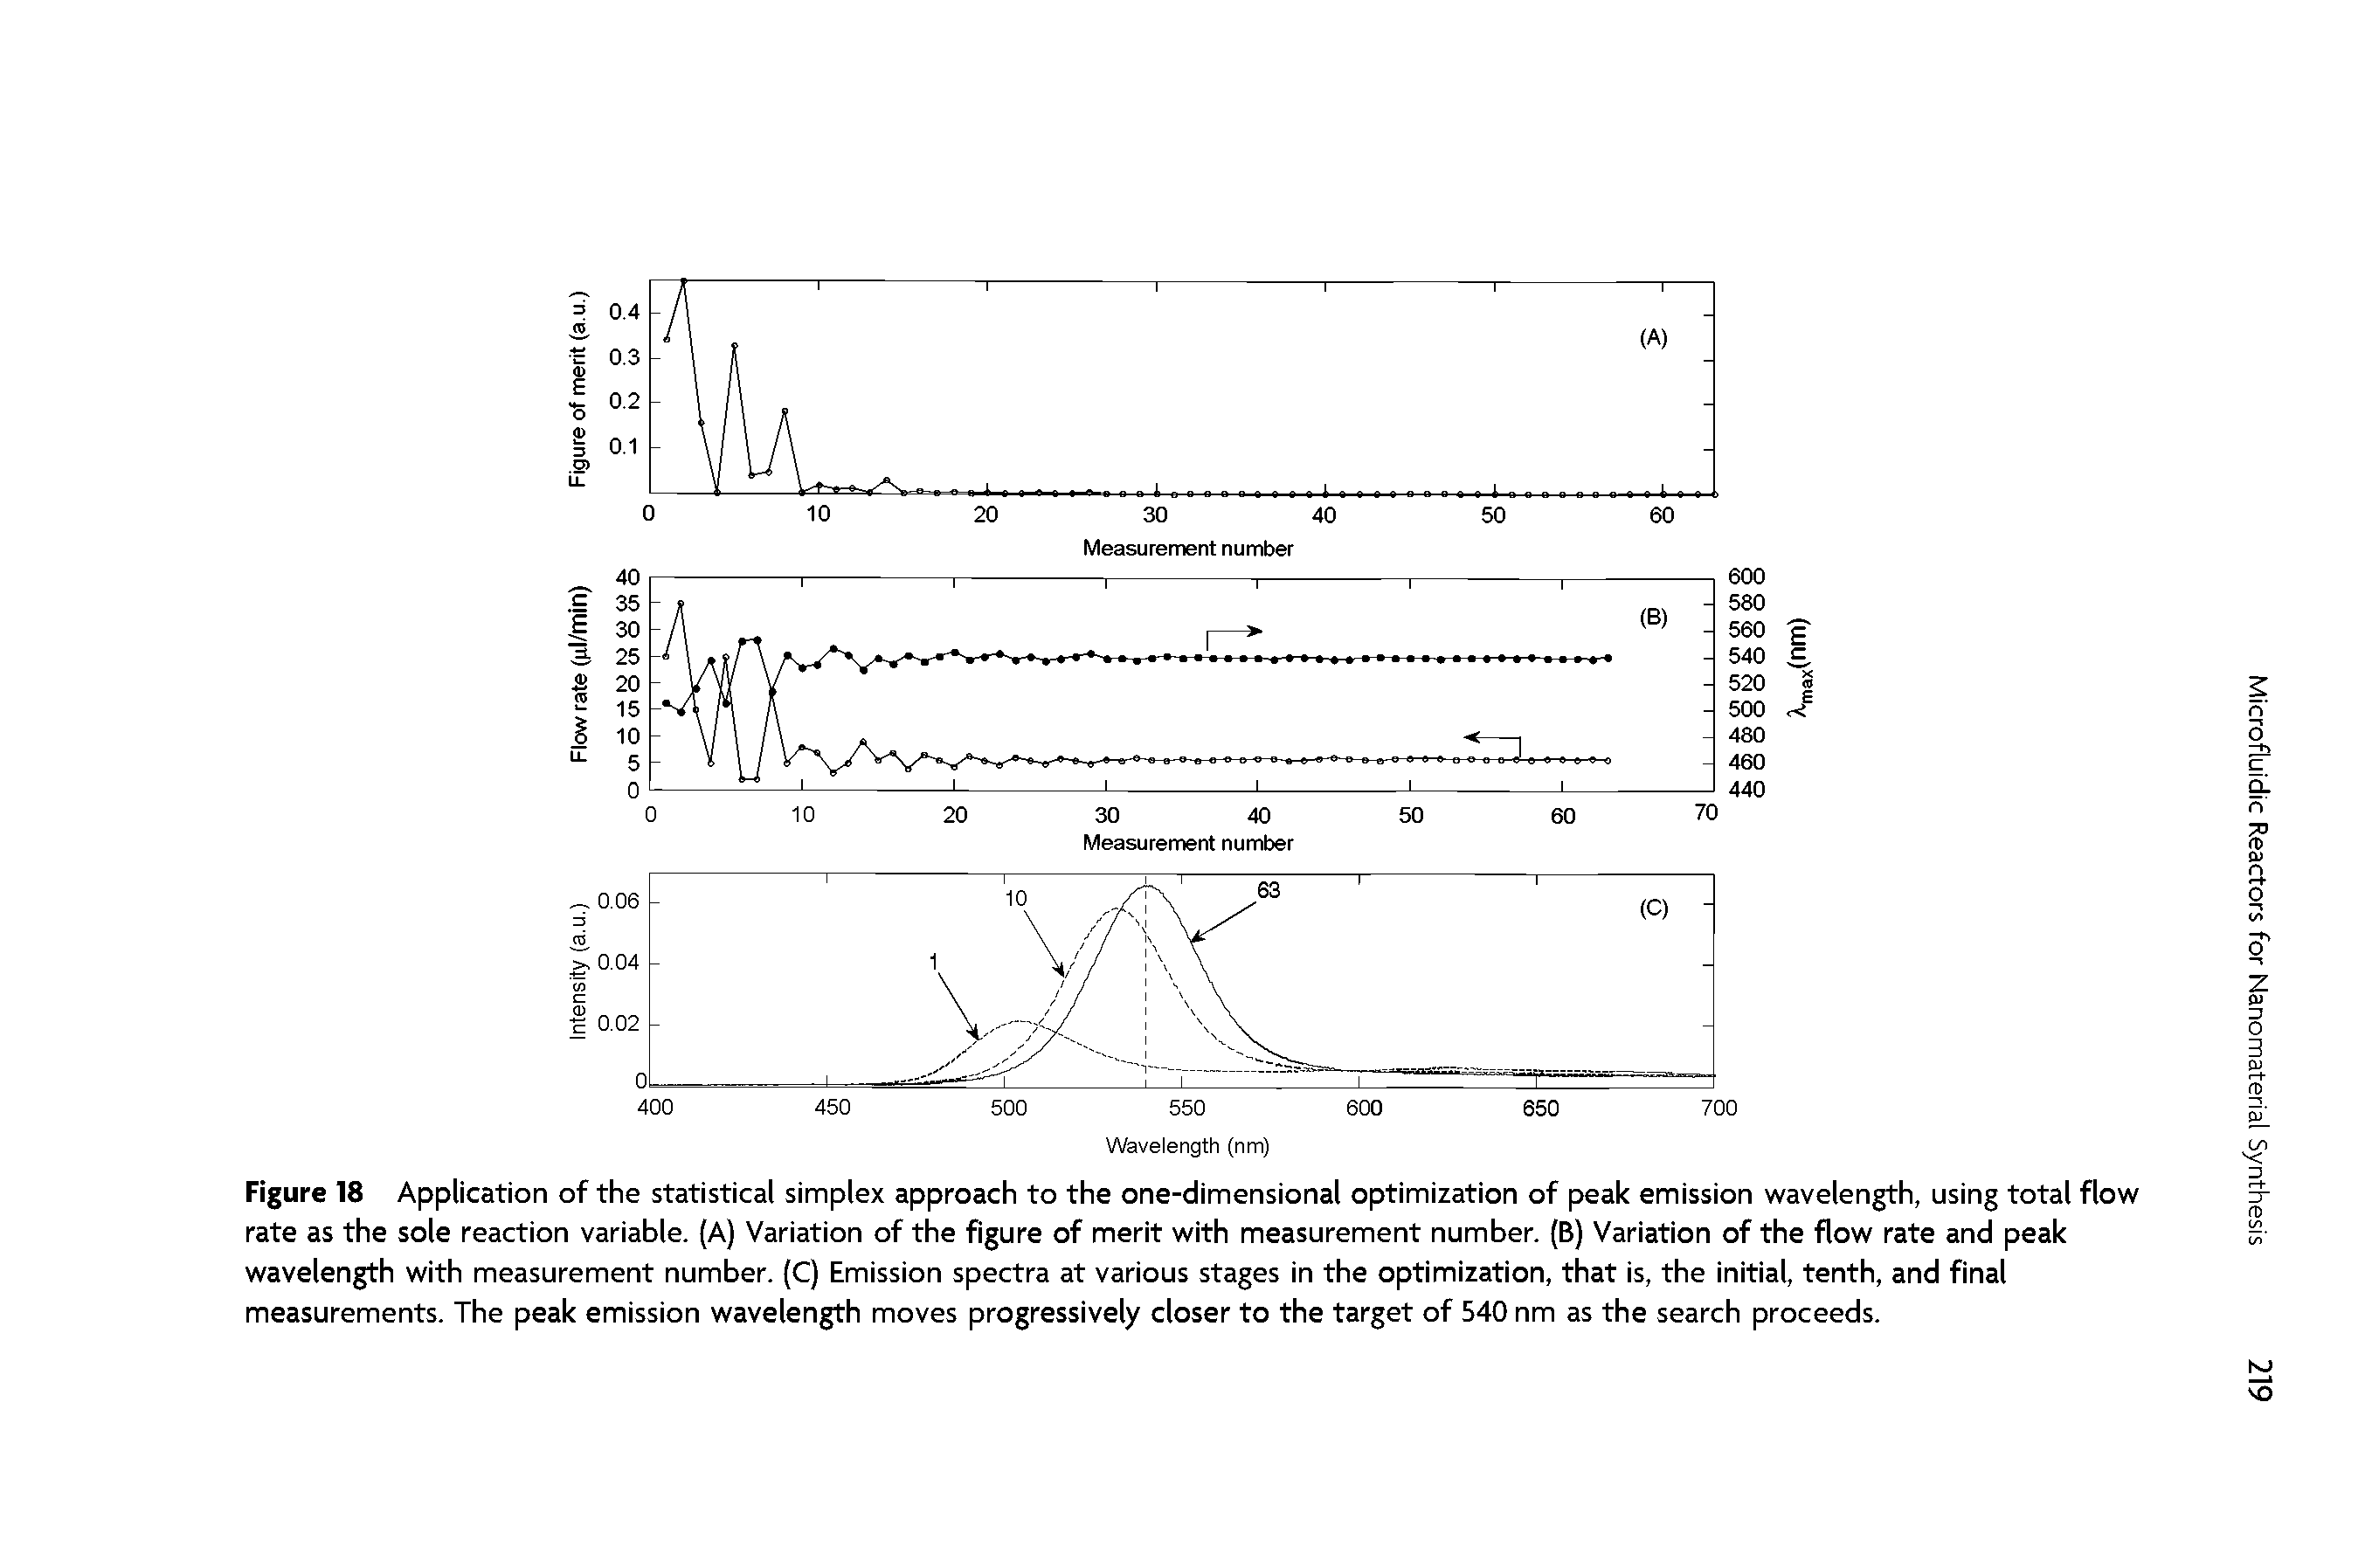 Figure 18 Application of the statistical simplex approach to the one-dimensional optimization of peak emission wavelength, using total flow rate as the sole reaction variable. (A) Variation of the figure of merit with measurement number. (B) Variation of the flow rate and peak wavelength with measurement number. (C) Emission spectra at various stages in the optimization, that is, the initial, tenth, and final measurements. The peak emission wavelength moves progressively closer to the target of 540 nm as the search proceeds.